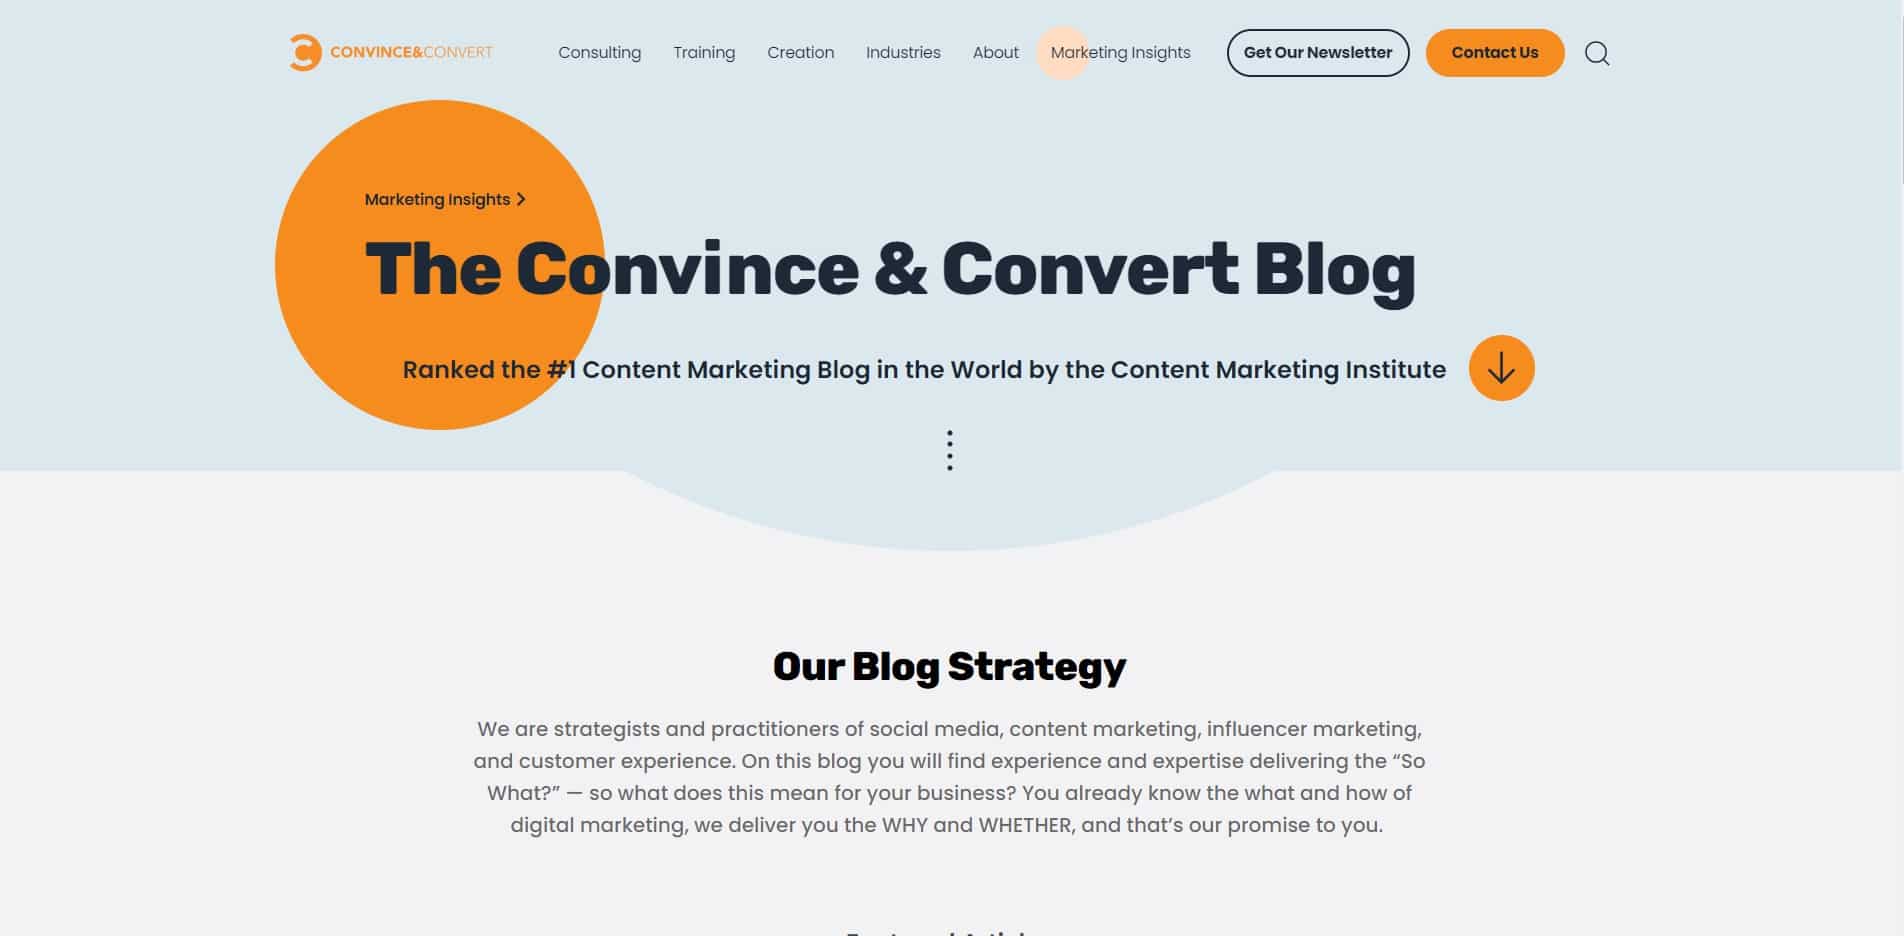 the convince and convert blog is one of the best b2b marketing blogs for content marketing